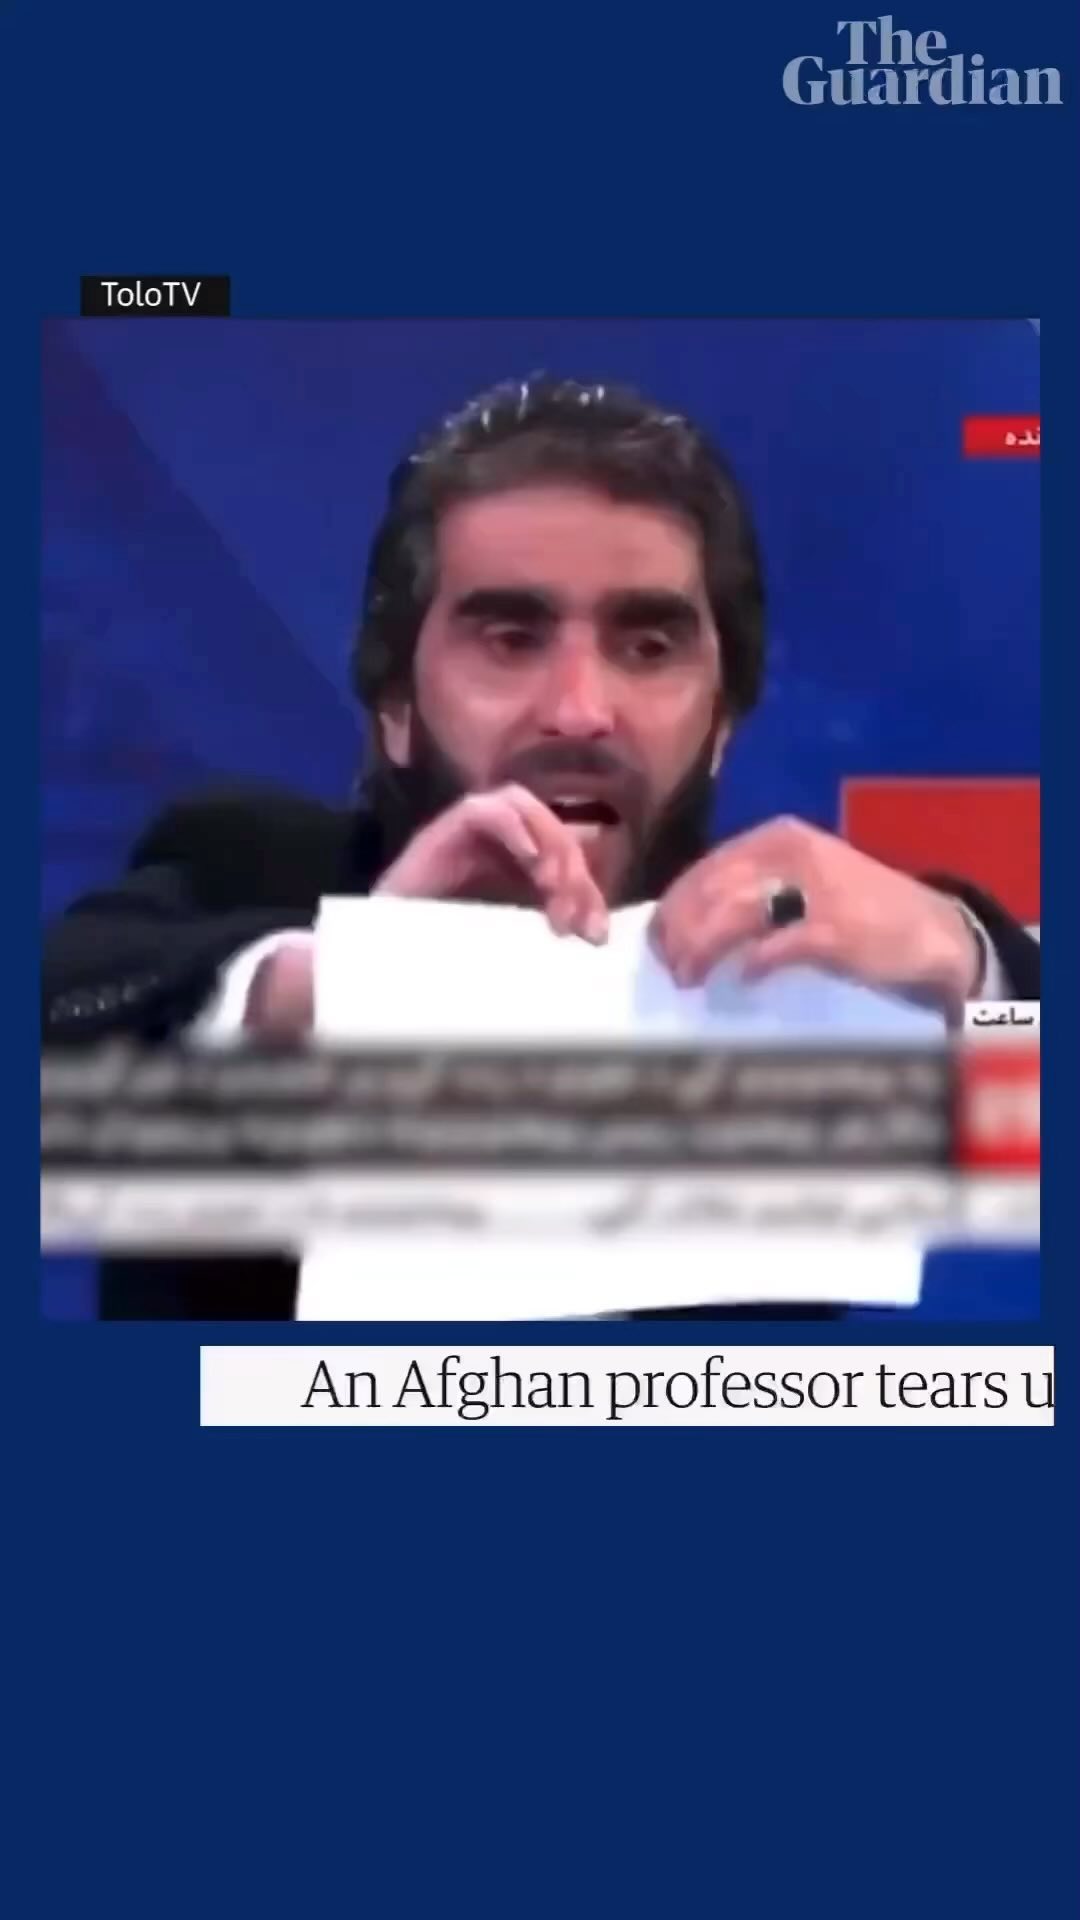 Amazing. I am so moved by this professor having courage AS A MAN to fight for women’s education in Afghanistan. Bravo. You are a heroe to my heart and eyes. Thank you.